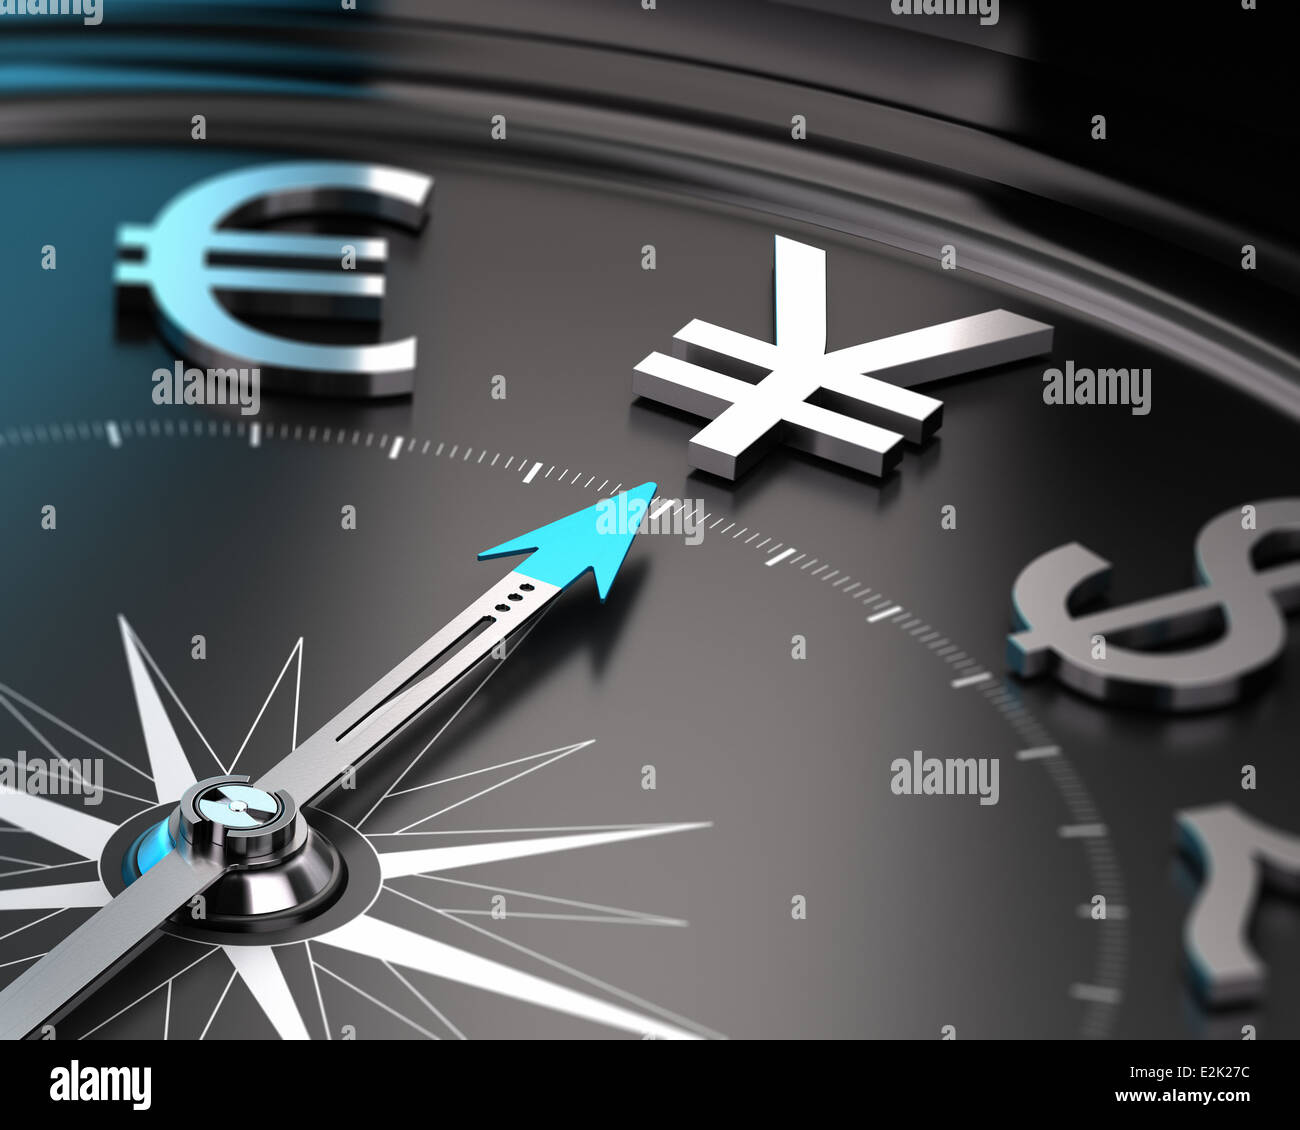 JPY YEN in a compass with the needle pointing the symbol with blur effect. Concept illustration of investment. Stock Photo